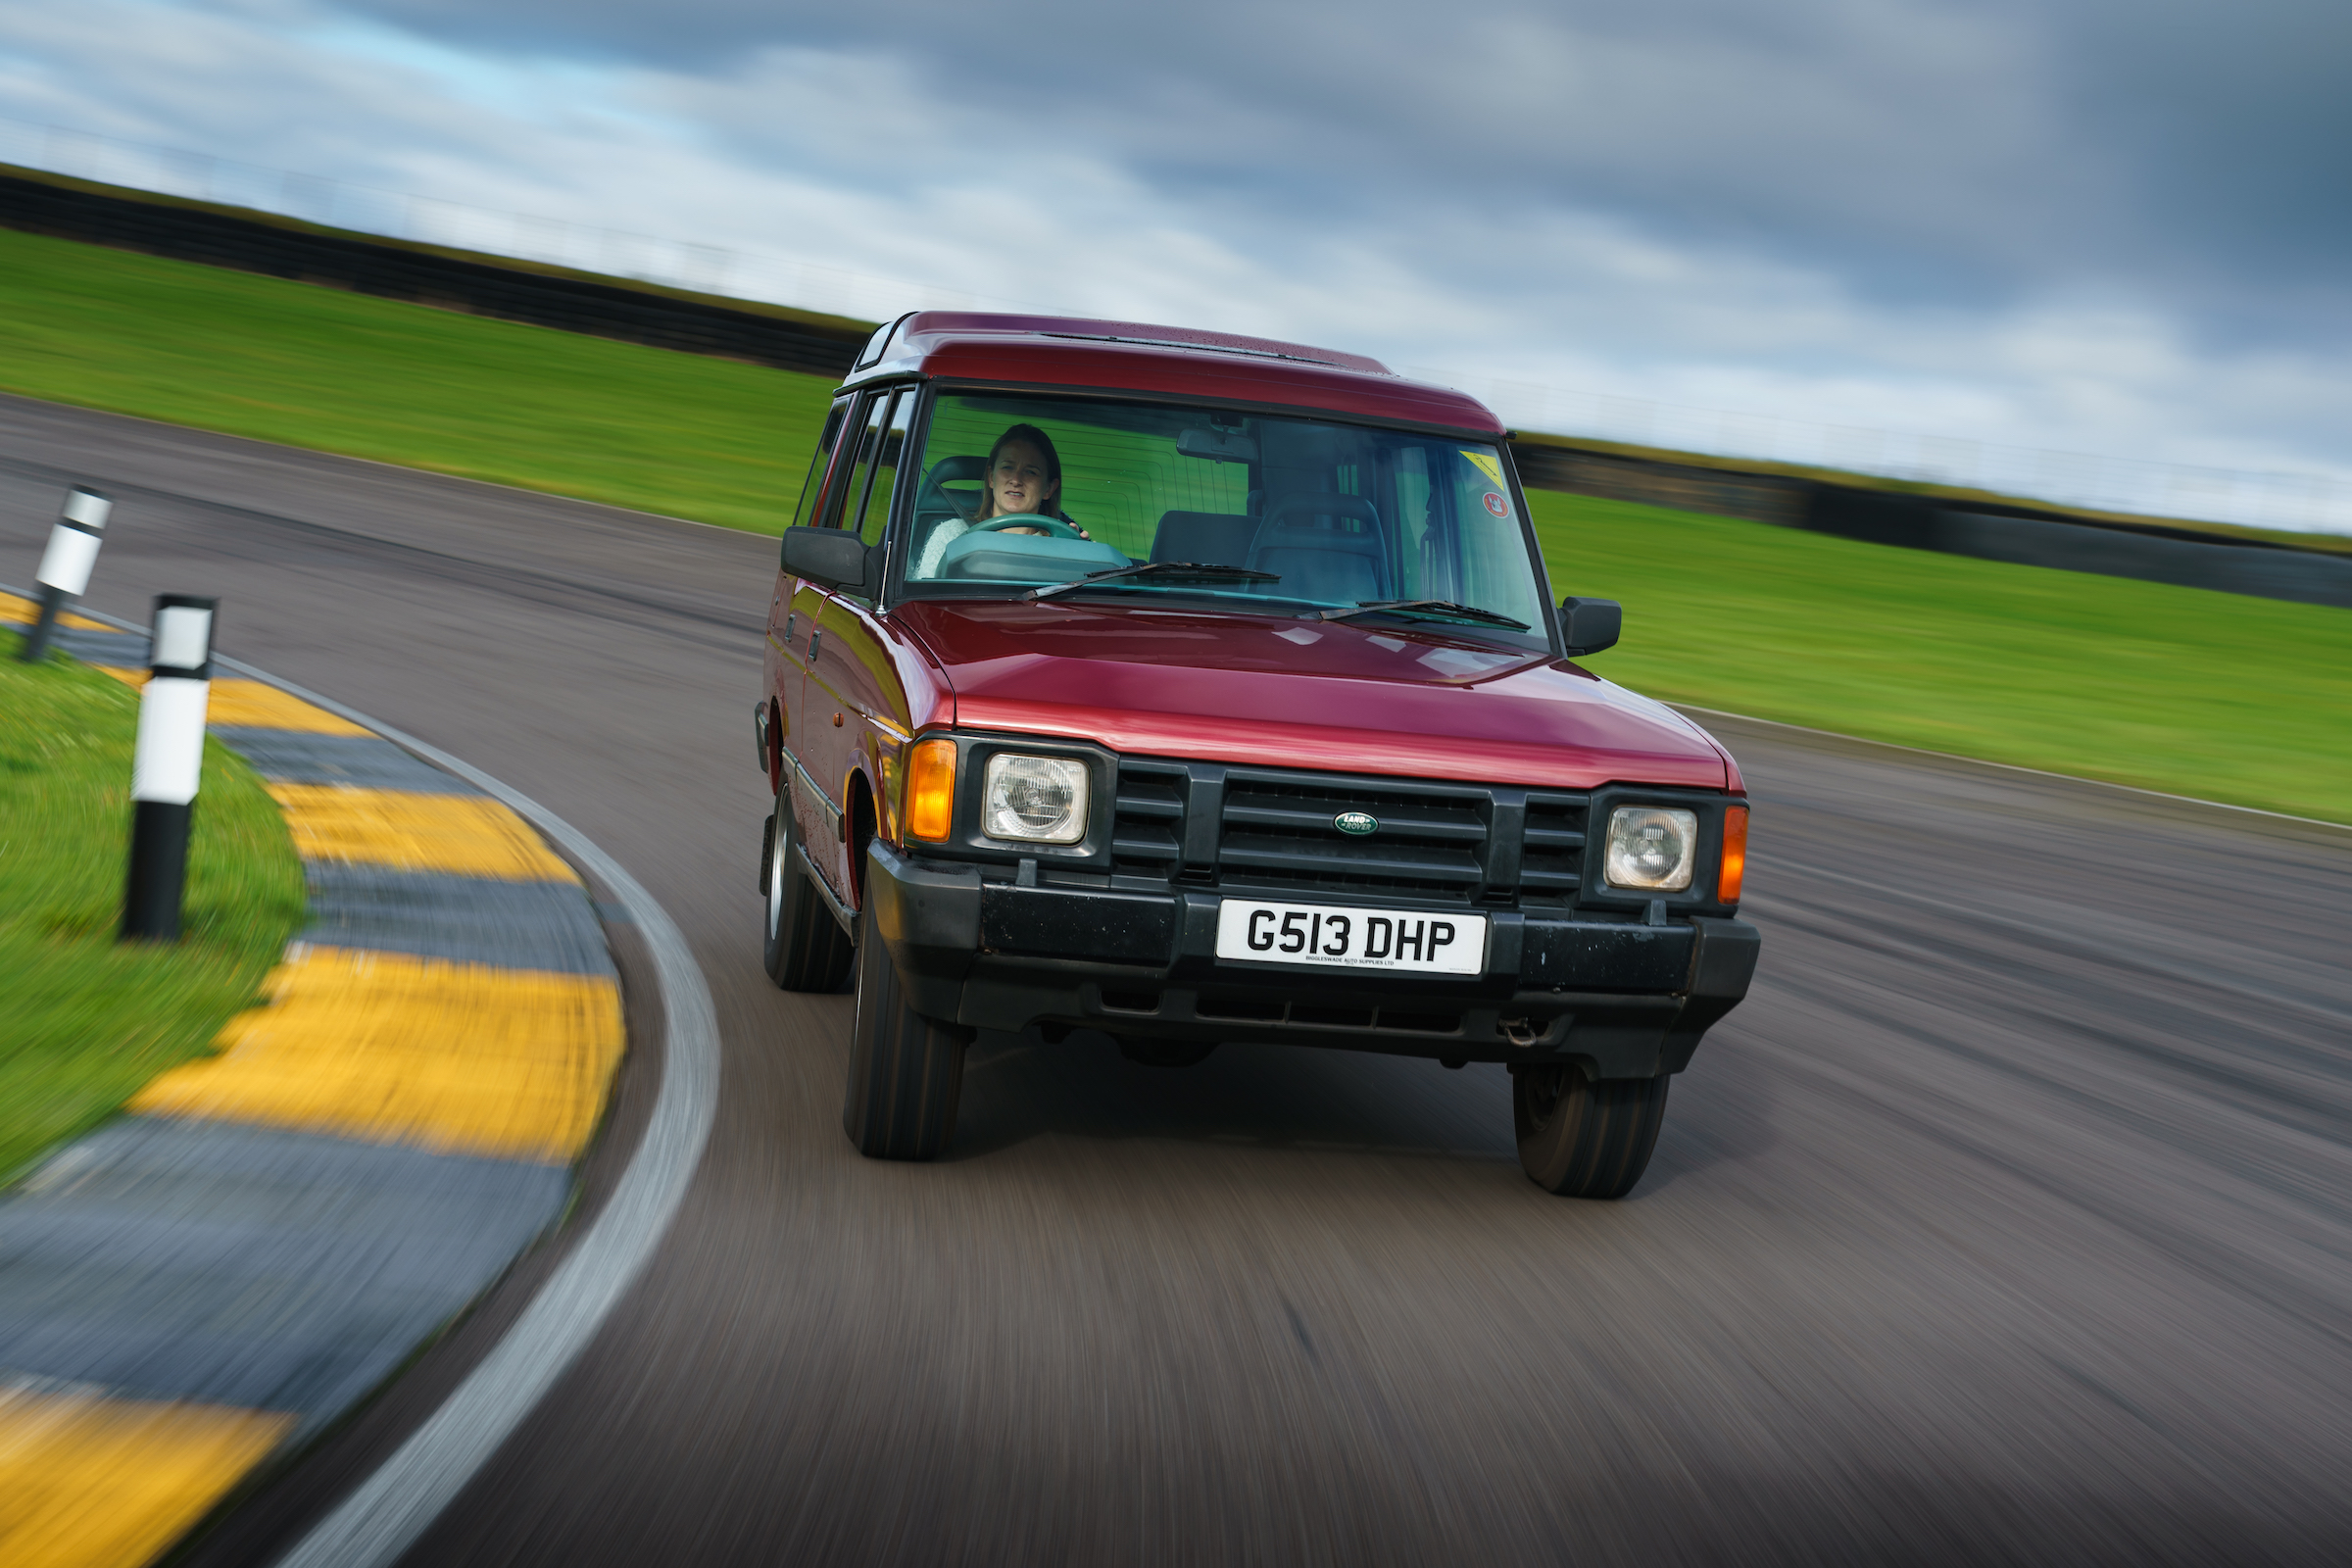 JLR creative chief: Range Rover, Defender, Discovery brands bring 